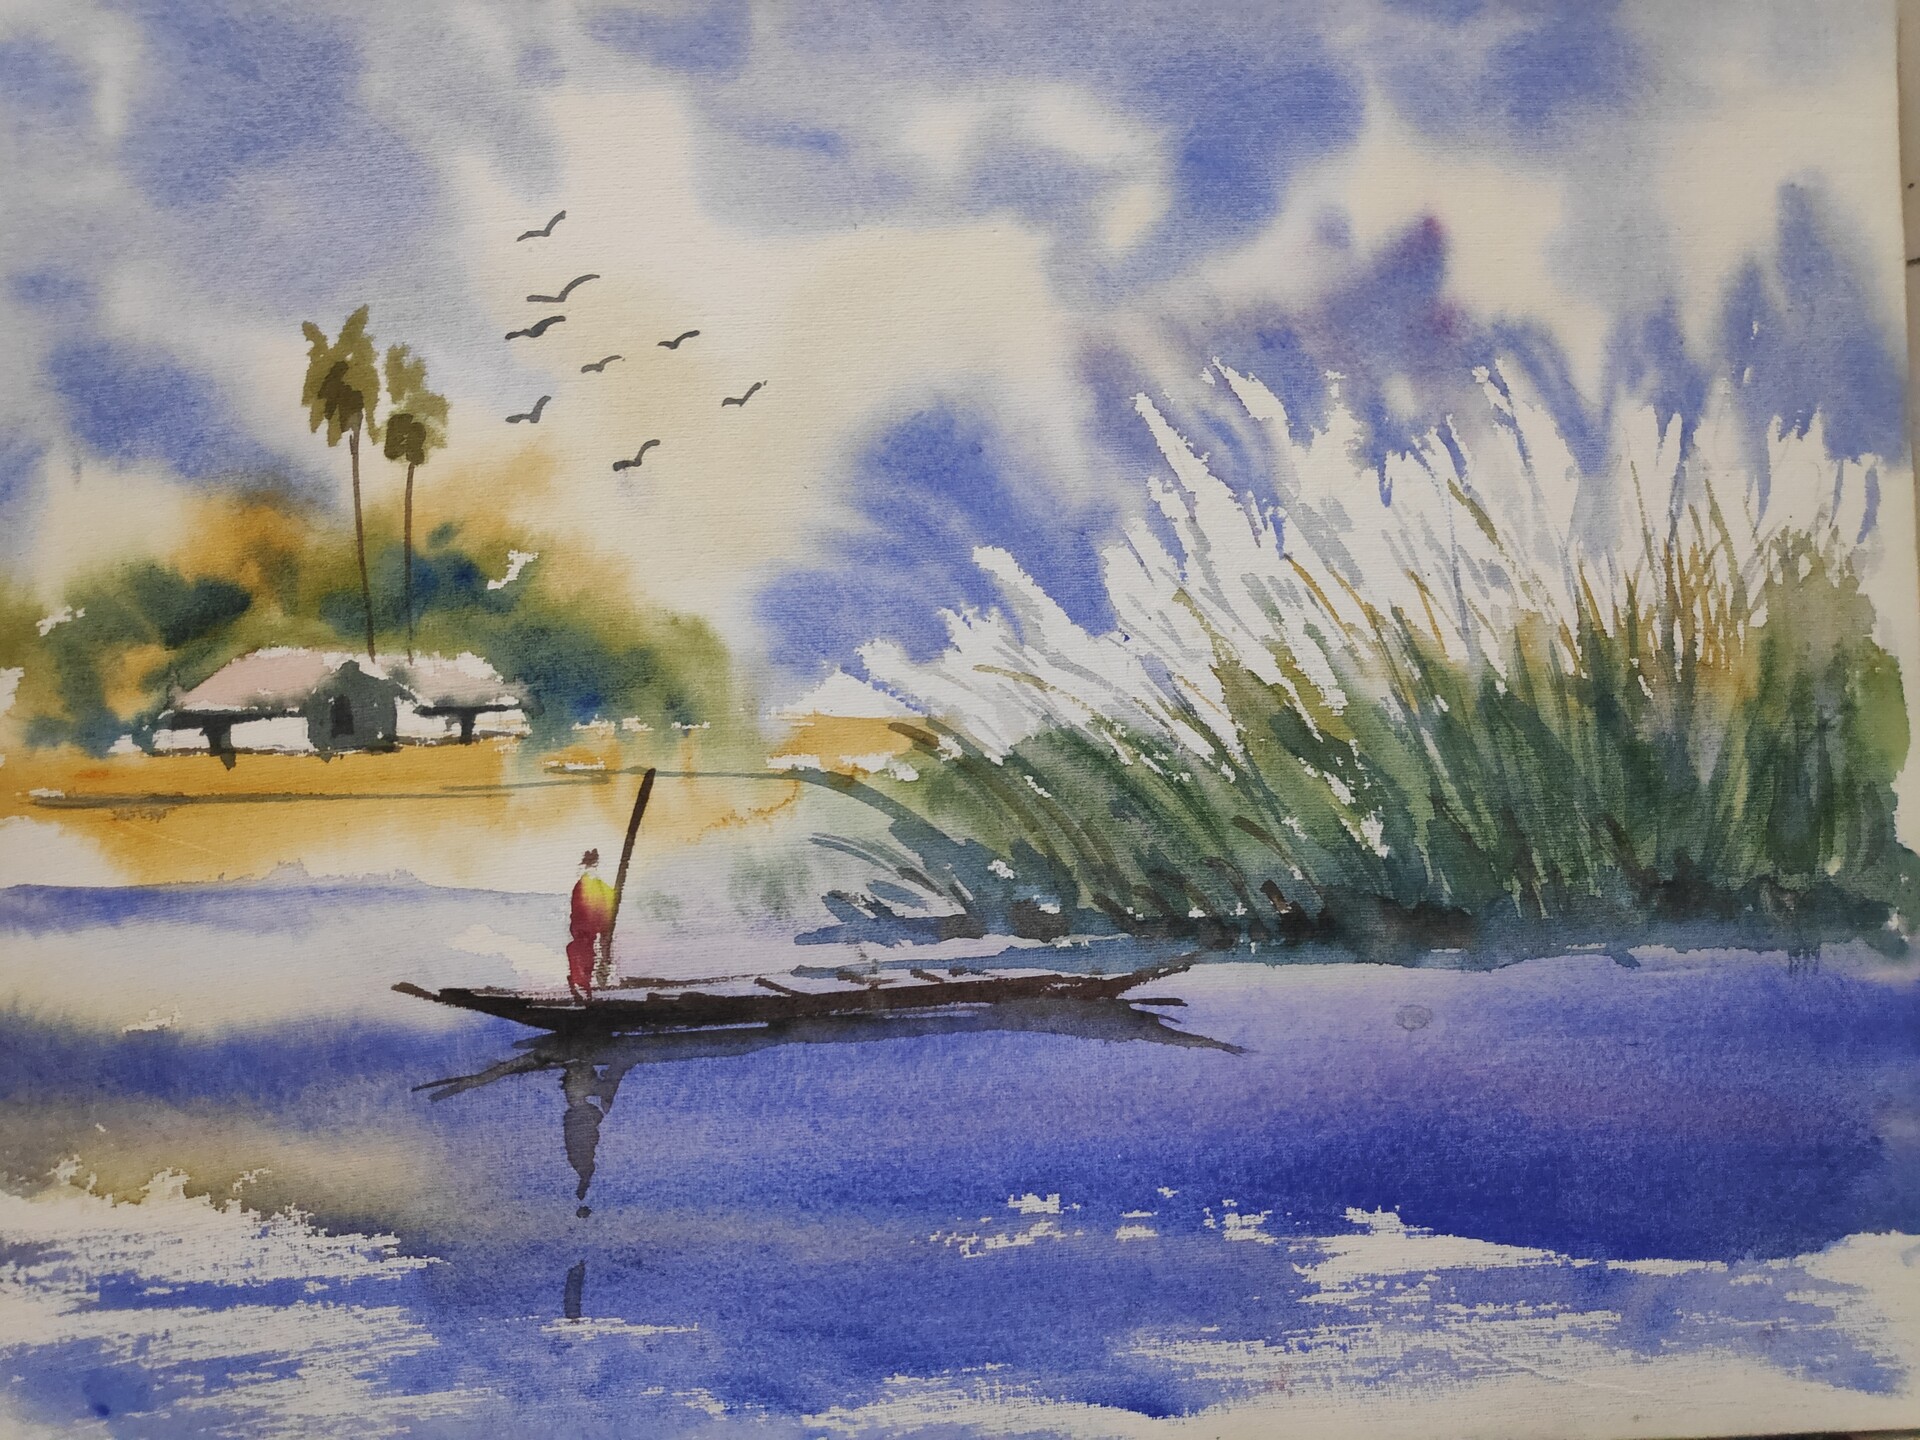 WATERCOLOR PAINTING ON HANDMADE PAPER 